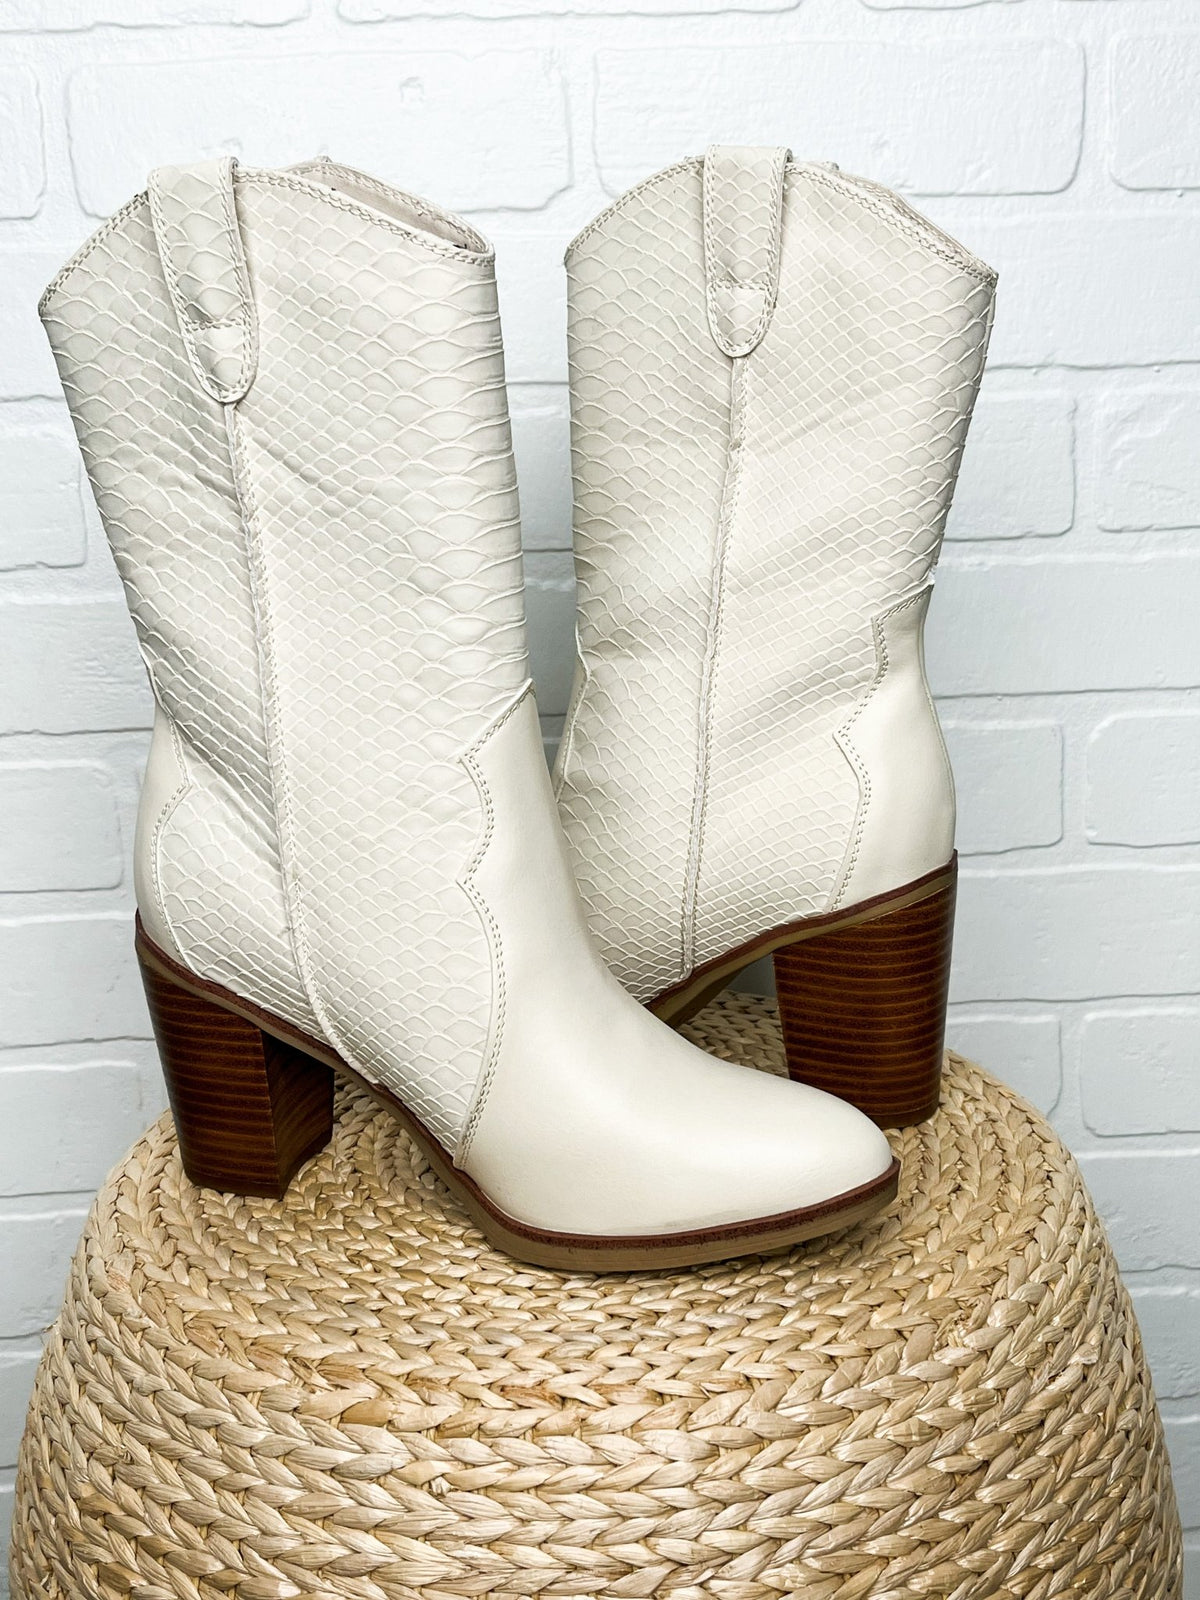 Raylyn cowboy boots ivory python - Cute boots - Trendy Shoes at Lush Fashion Lounge Boutique in Oklahoma City